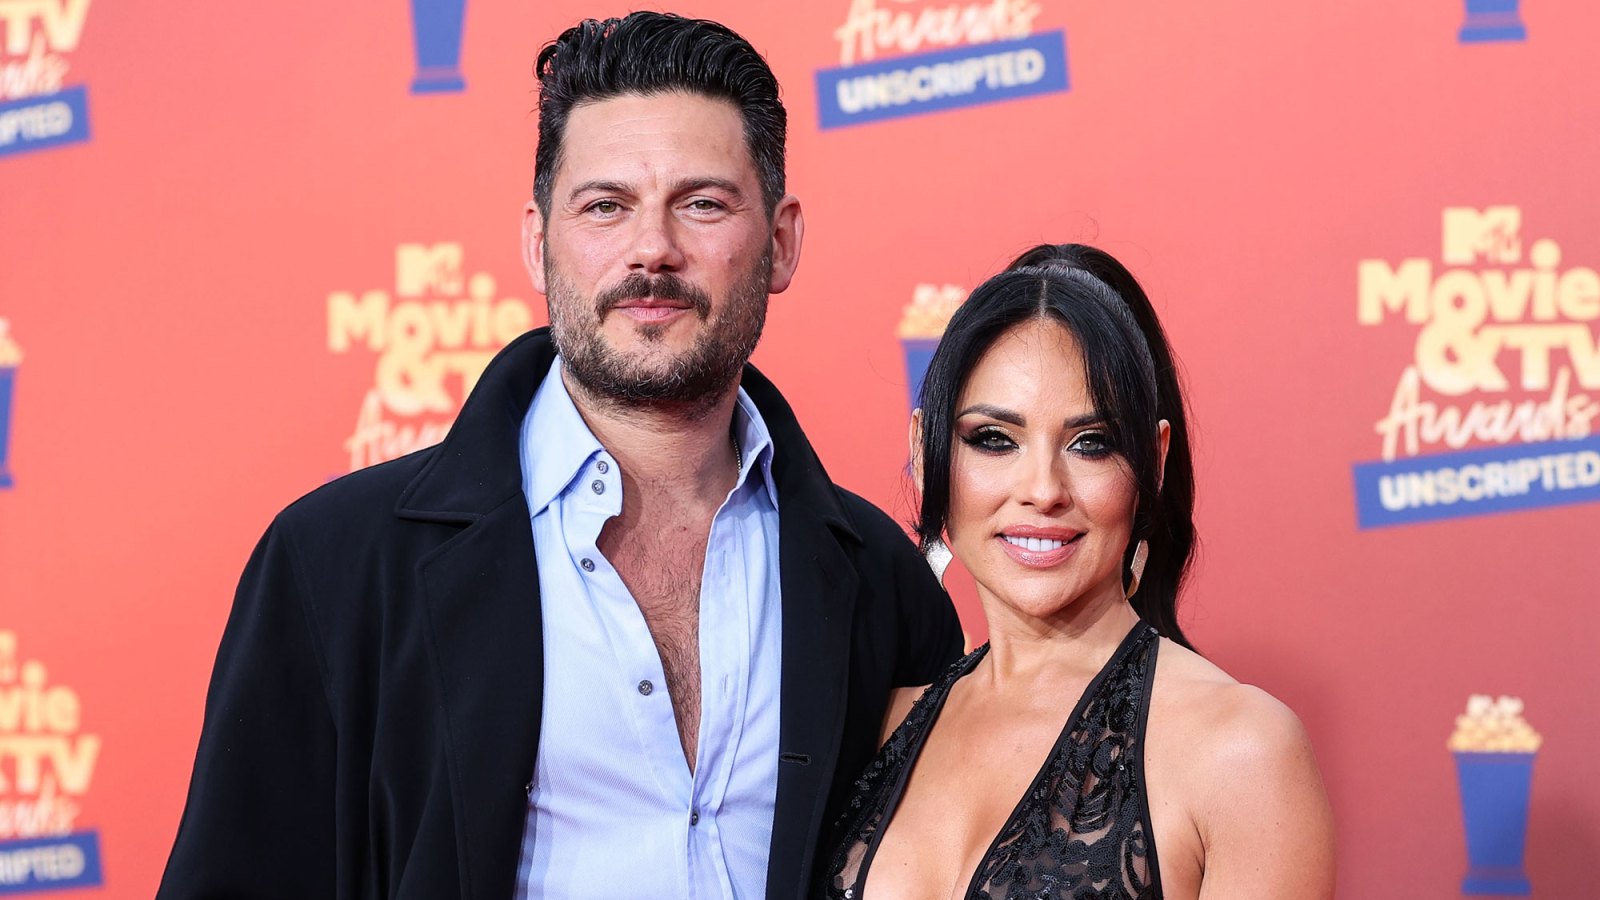 Selling Sunset’s Vanessa Villela and Fiance Nicholas Hardy Are Married After Double Proposal